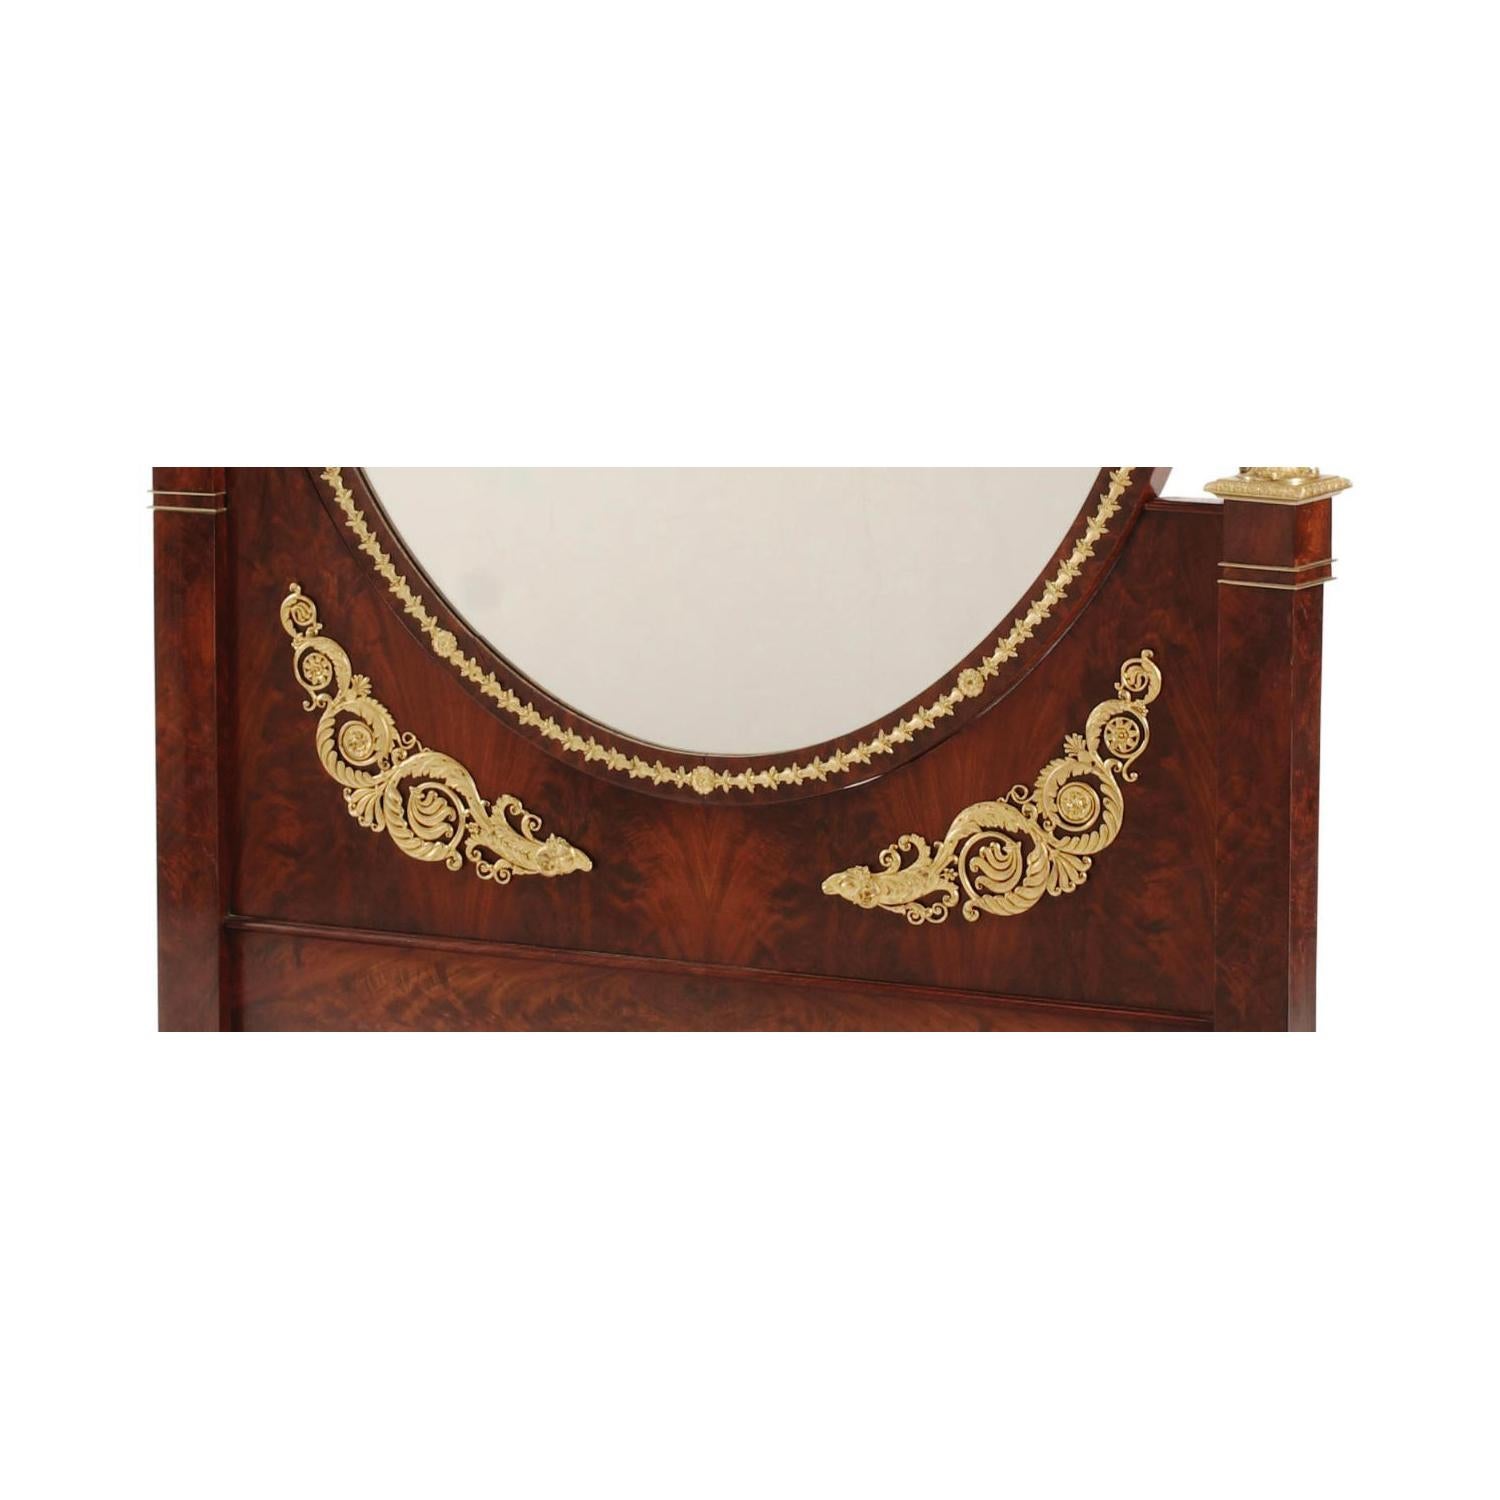 French Napoleon III Empire Style Mahogany and Ormolu Mounted Cheval Mirror In Fair Condition For Sale In Los Angeles, CA